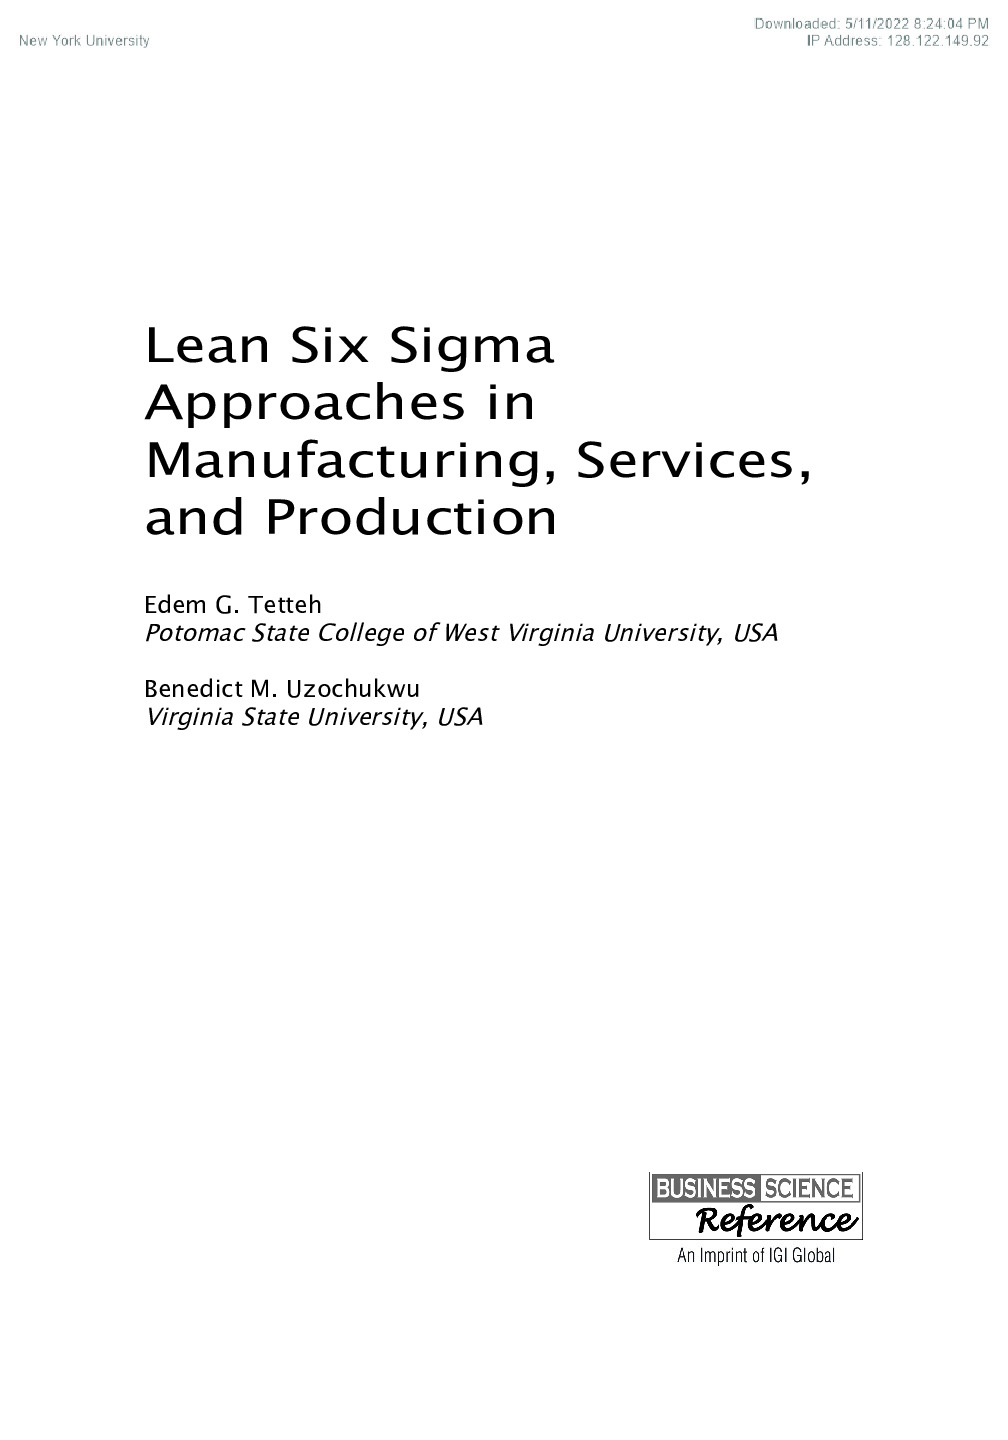 Lean Six Sigma Approaches in Manufacturing, Services, and Production